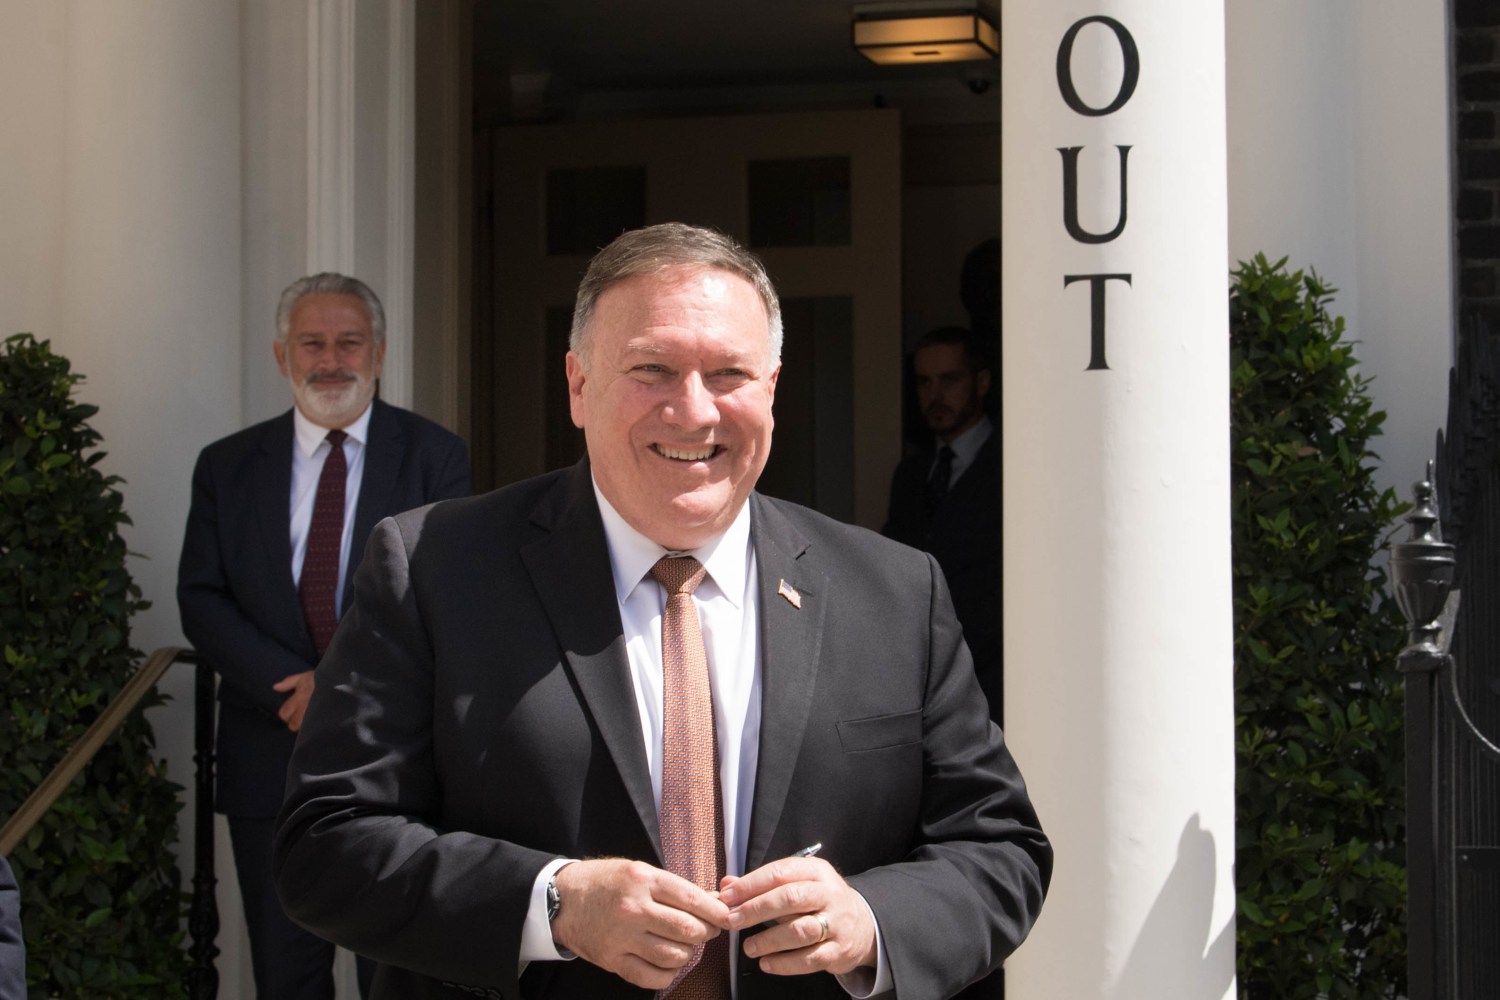 PA via ReutersUnited States Secretary of State, Mike Pompeo leaves the In And Out Club in London where he met backbench MPs ahead of meetings with Prime Minister Boris Johnson and Foreign Secretary Dominic Raab. PA Photo. Picture date: Tuesday July 21, 2020. During the visit Mr Pompeo is expected to discuss global priorities, including the Covid-19 economic recovery plans, issues related to China and Hong Kong, and the US-UK free trade agreement negotiations. He will leave the UK on July 22 to travel to Denmark. See PA story POLITICS China. Photo credit should read: Stefan Rousseau/PA Wire